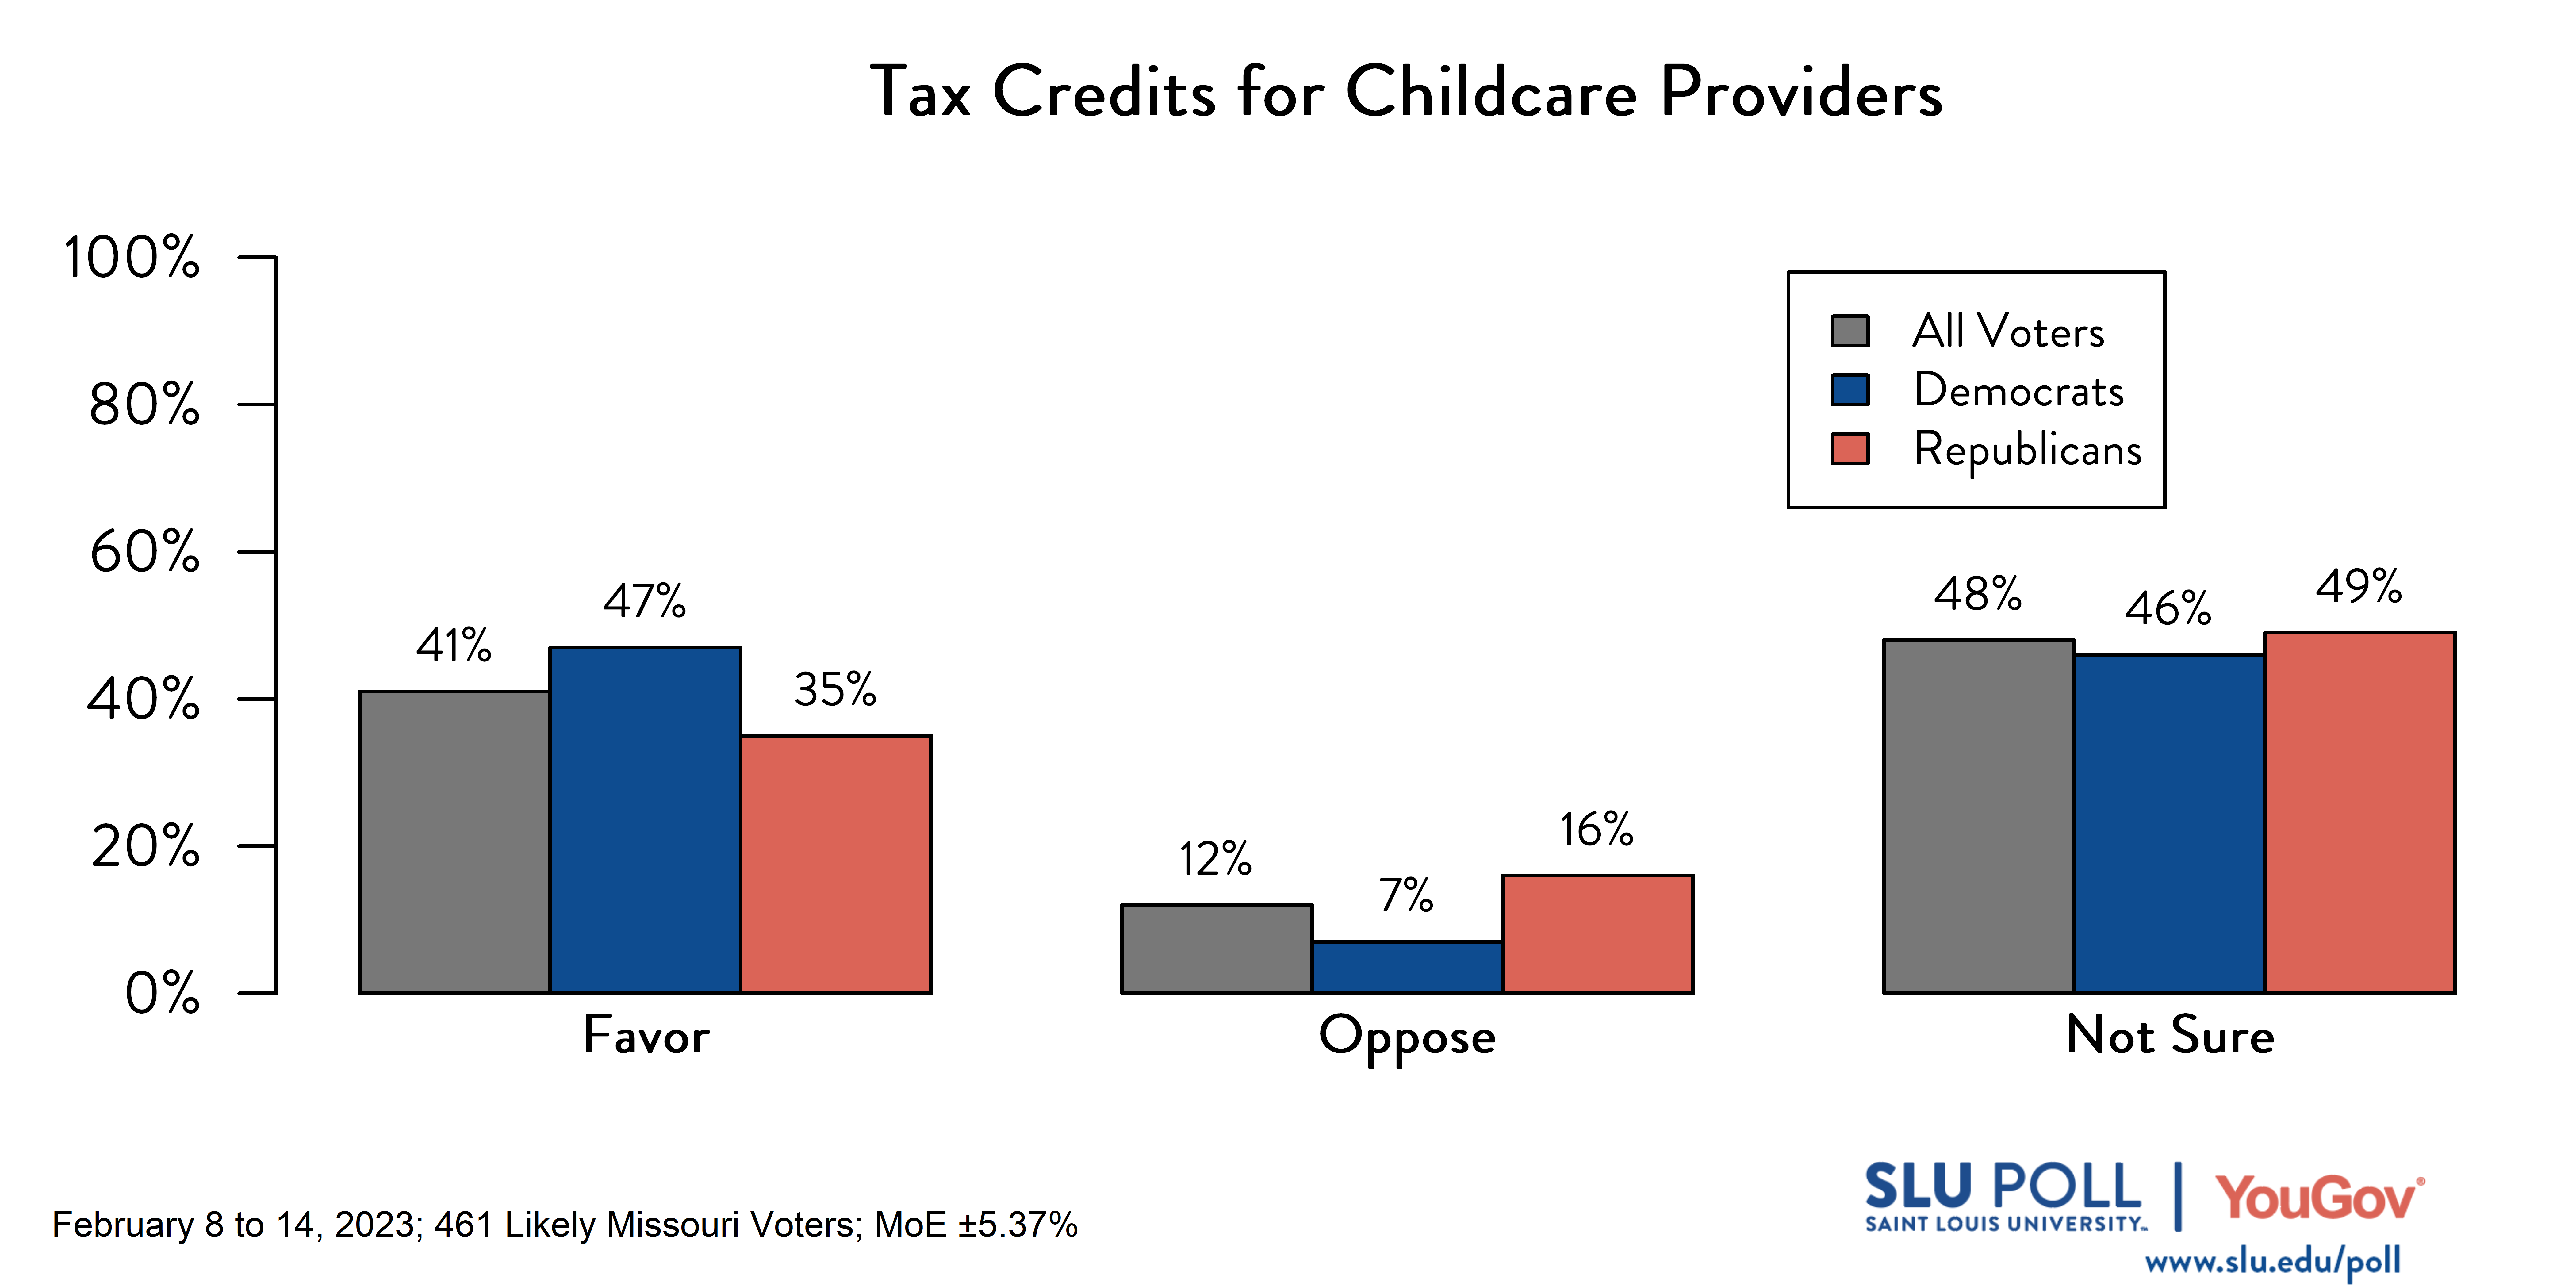 Likely voters' responses to 'Do you favor or oppose the following policies: Childcare providers with at least three employees may claim state credit equal to their employer withholding tax and 30% of their capital expenditures?': 41% Favor, 12% Oppose, and 48% Not sure. Democratic voters' responses: ' 47% Favor, 7% Oppose, and 46% Not sure. Republican voters' responses: 35% Favor, 16% Oppose, and 49% Not sure.